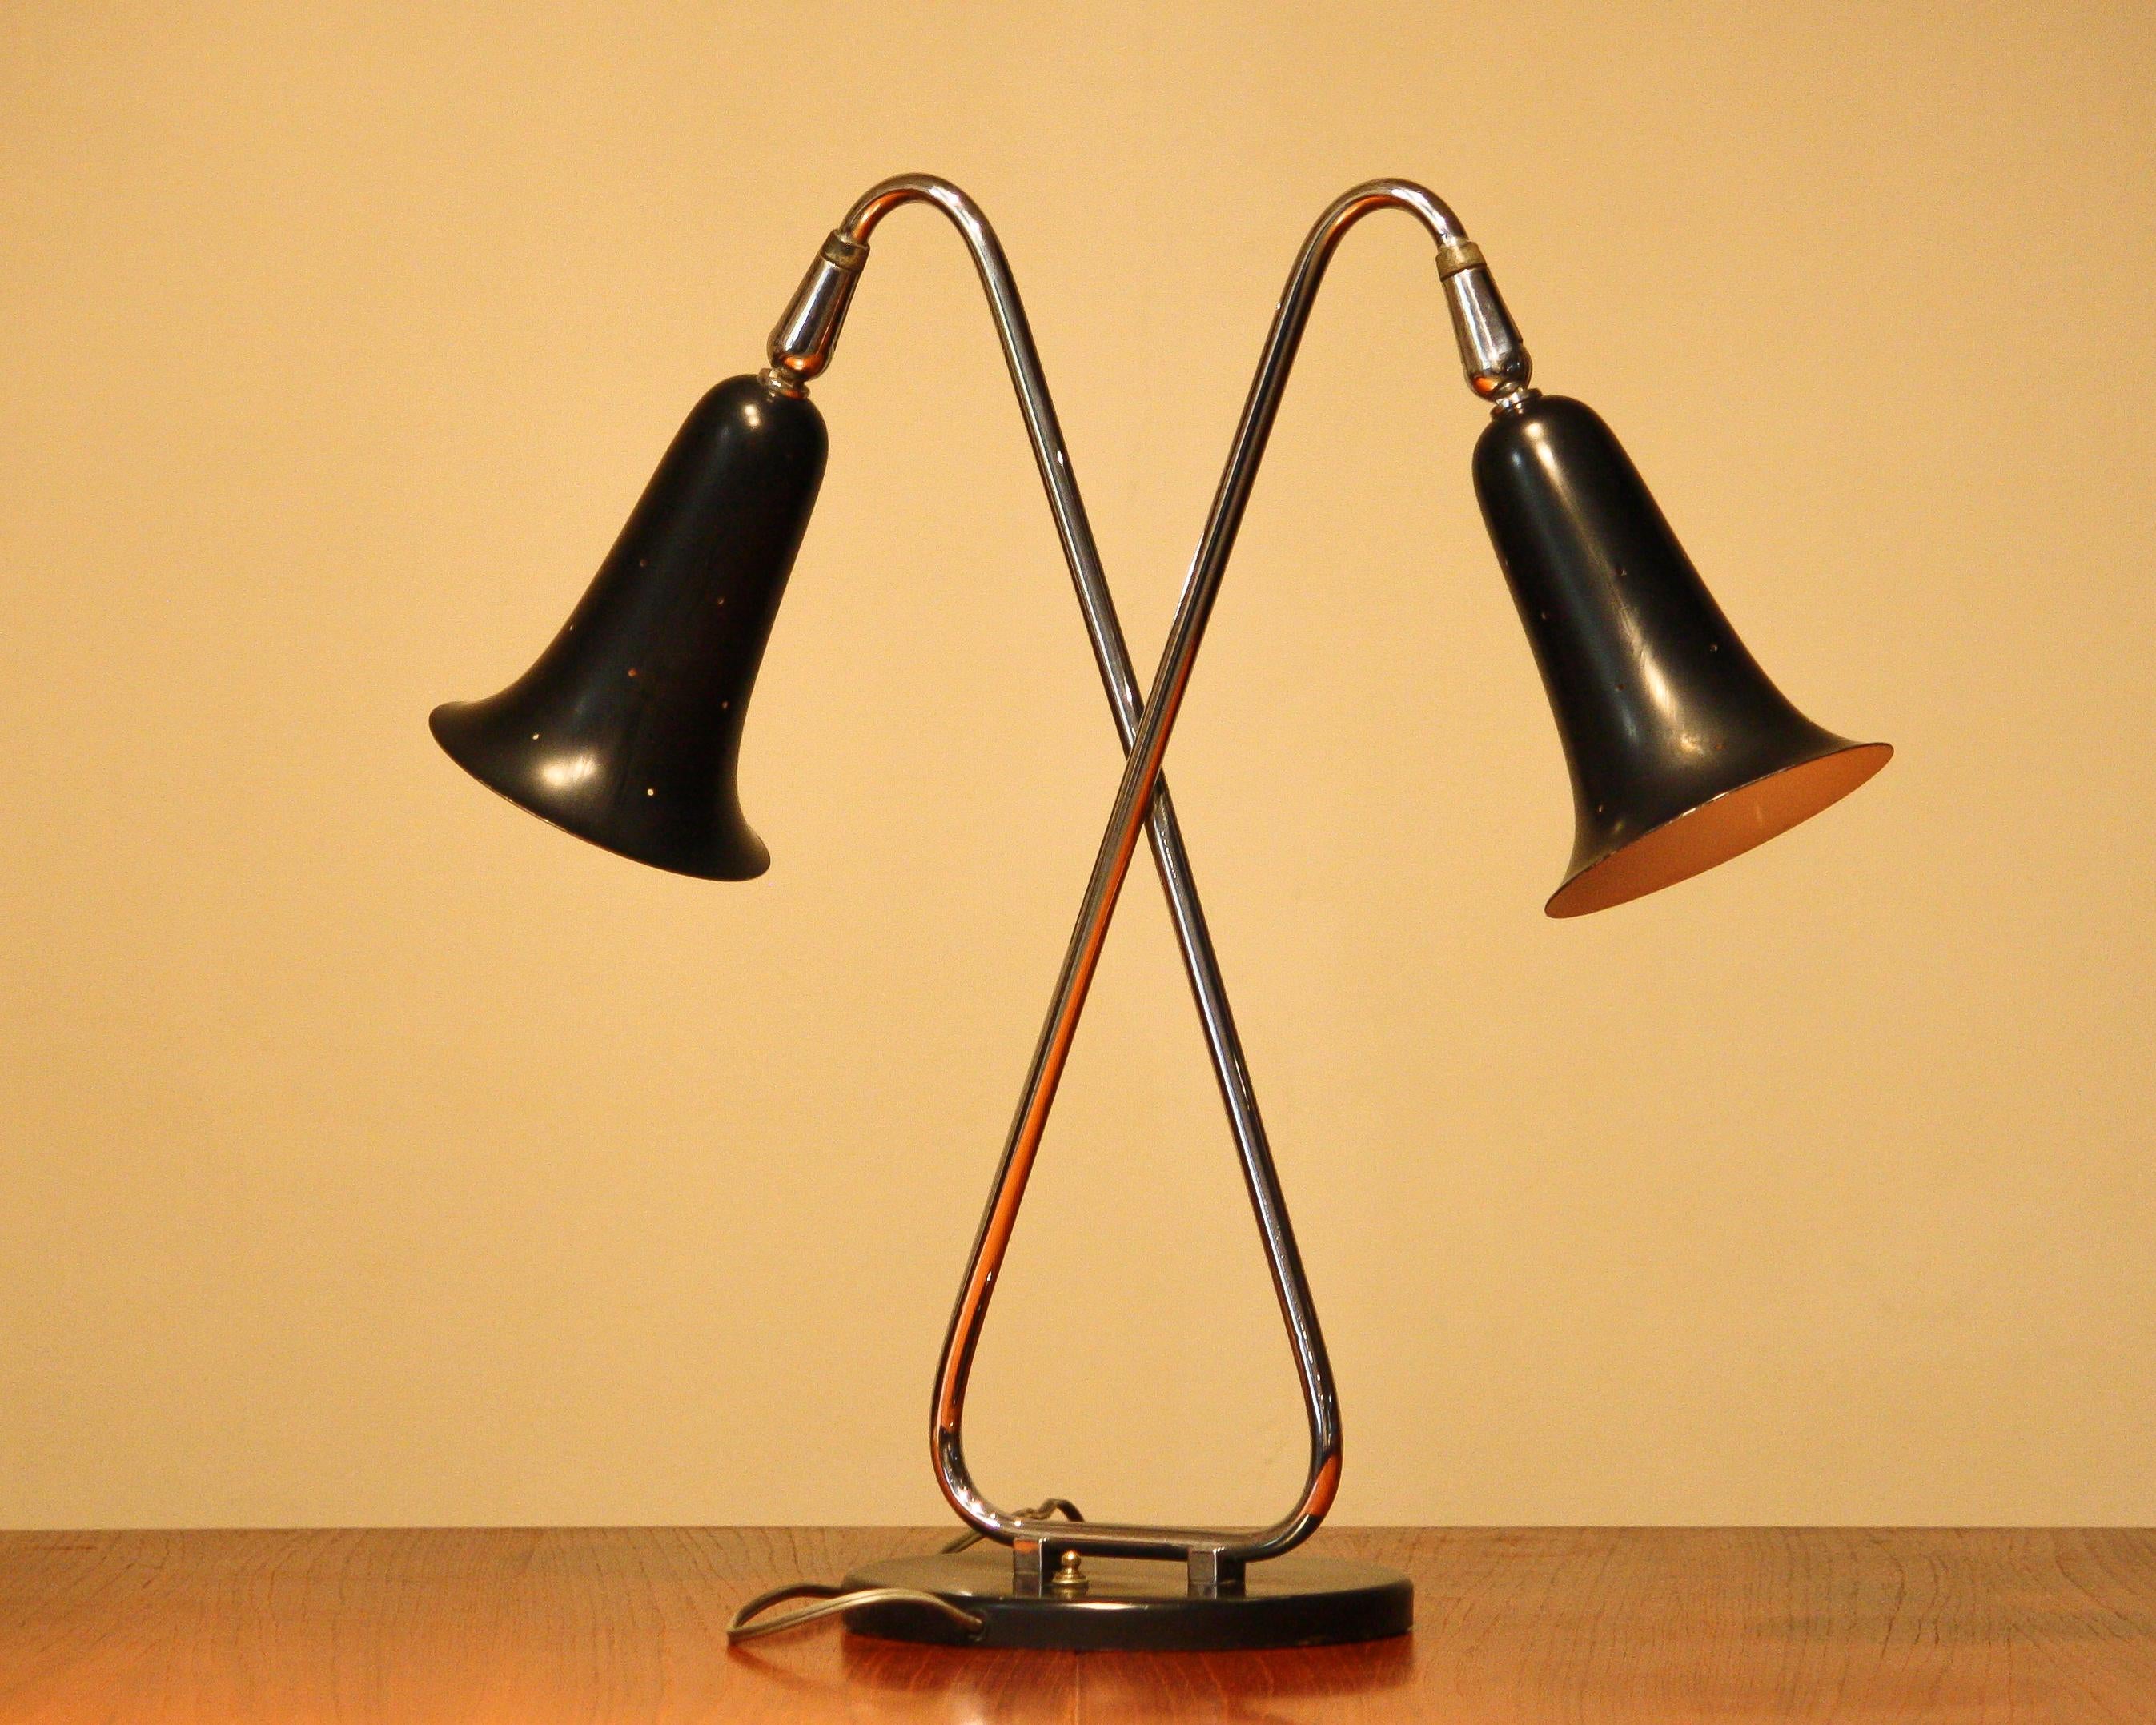 1950s, Two Shades Metal Black Lacquered and Chromed Desk/Table Lamp, USA 4